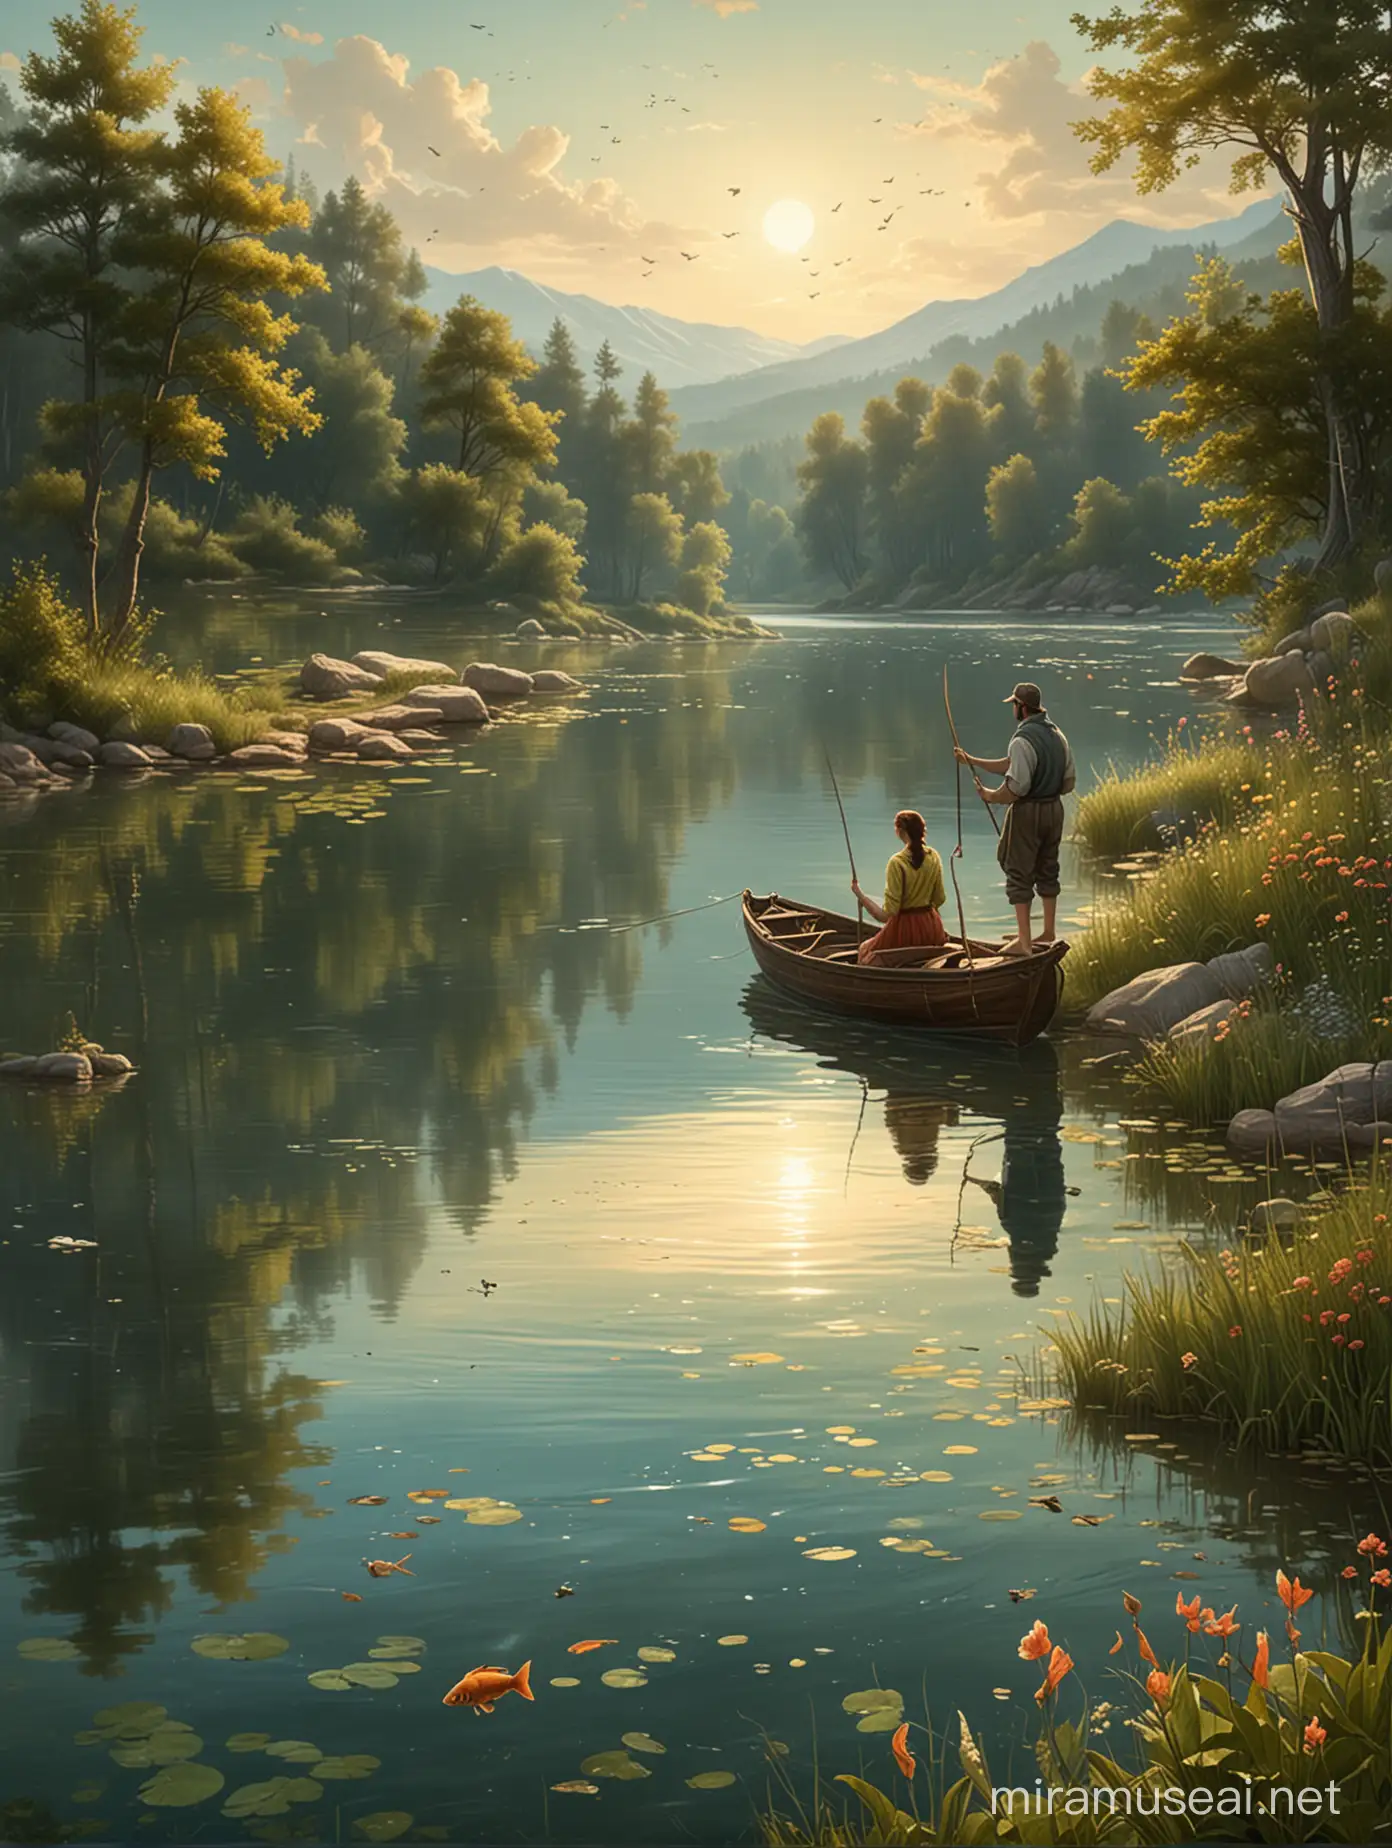 Serenity by the Lakeside The Fisherman and His Wife Tale Illustration